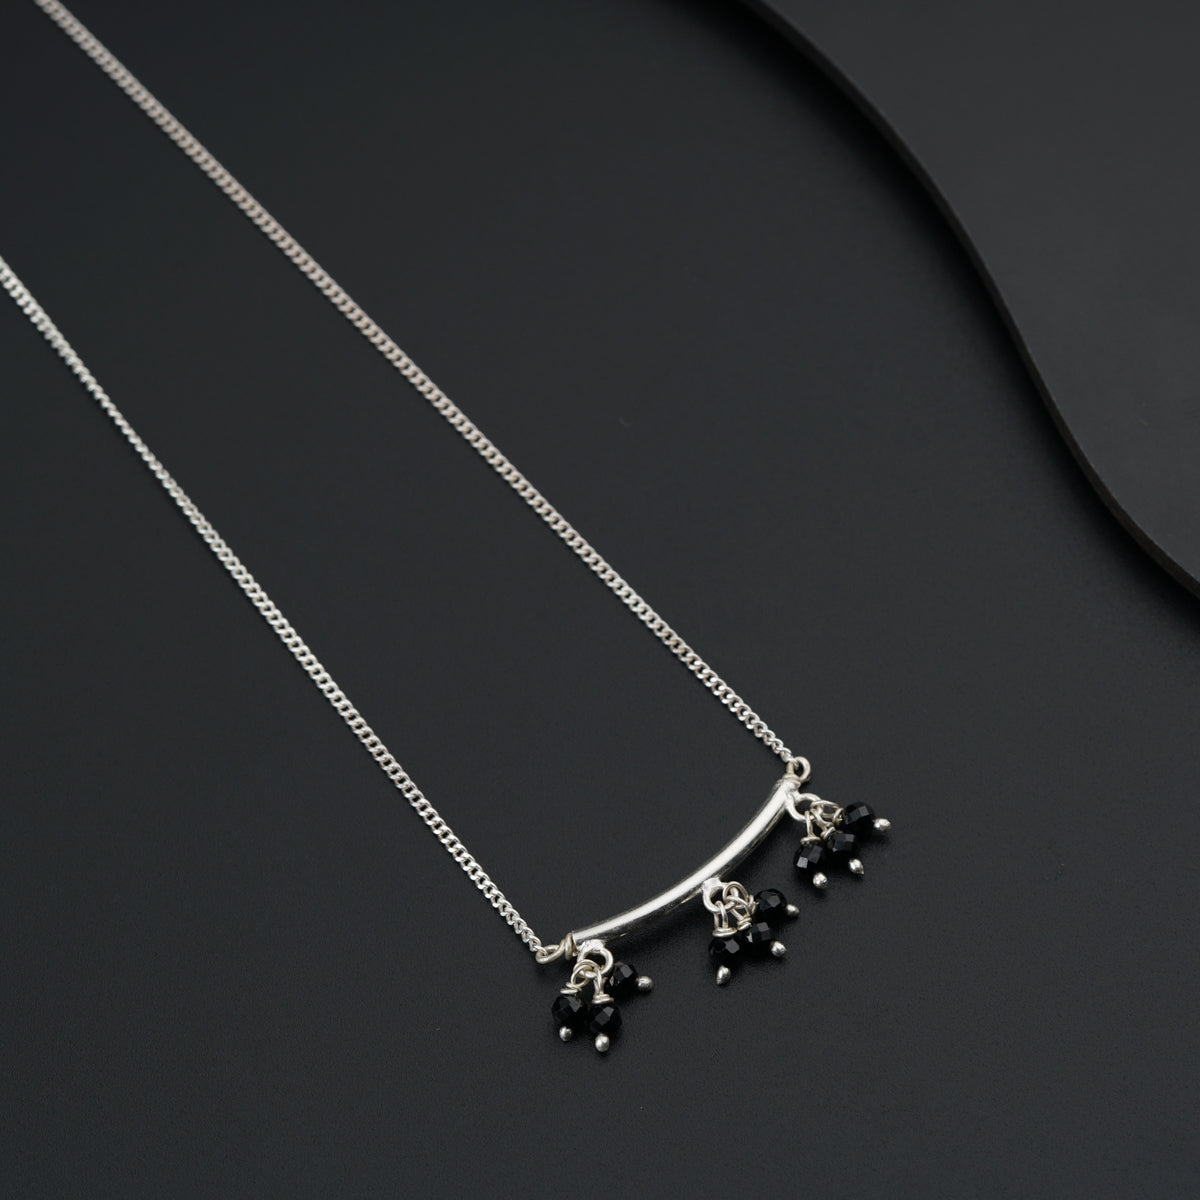 Handmade Silver Mangalsutra with tiny spinel latkans